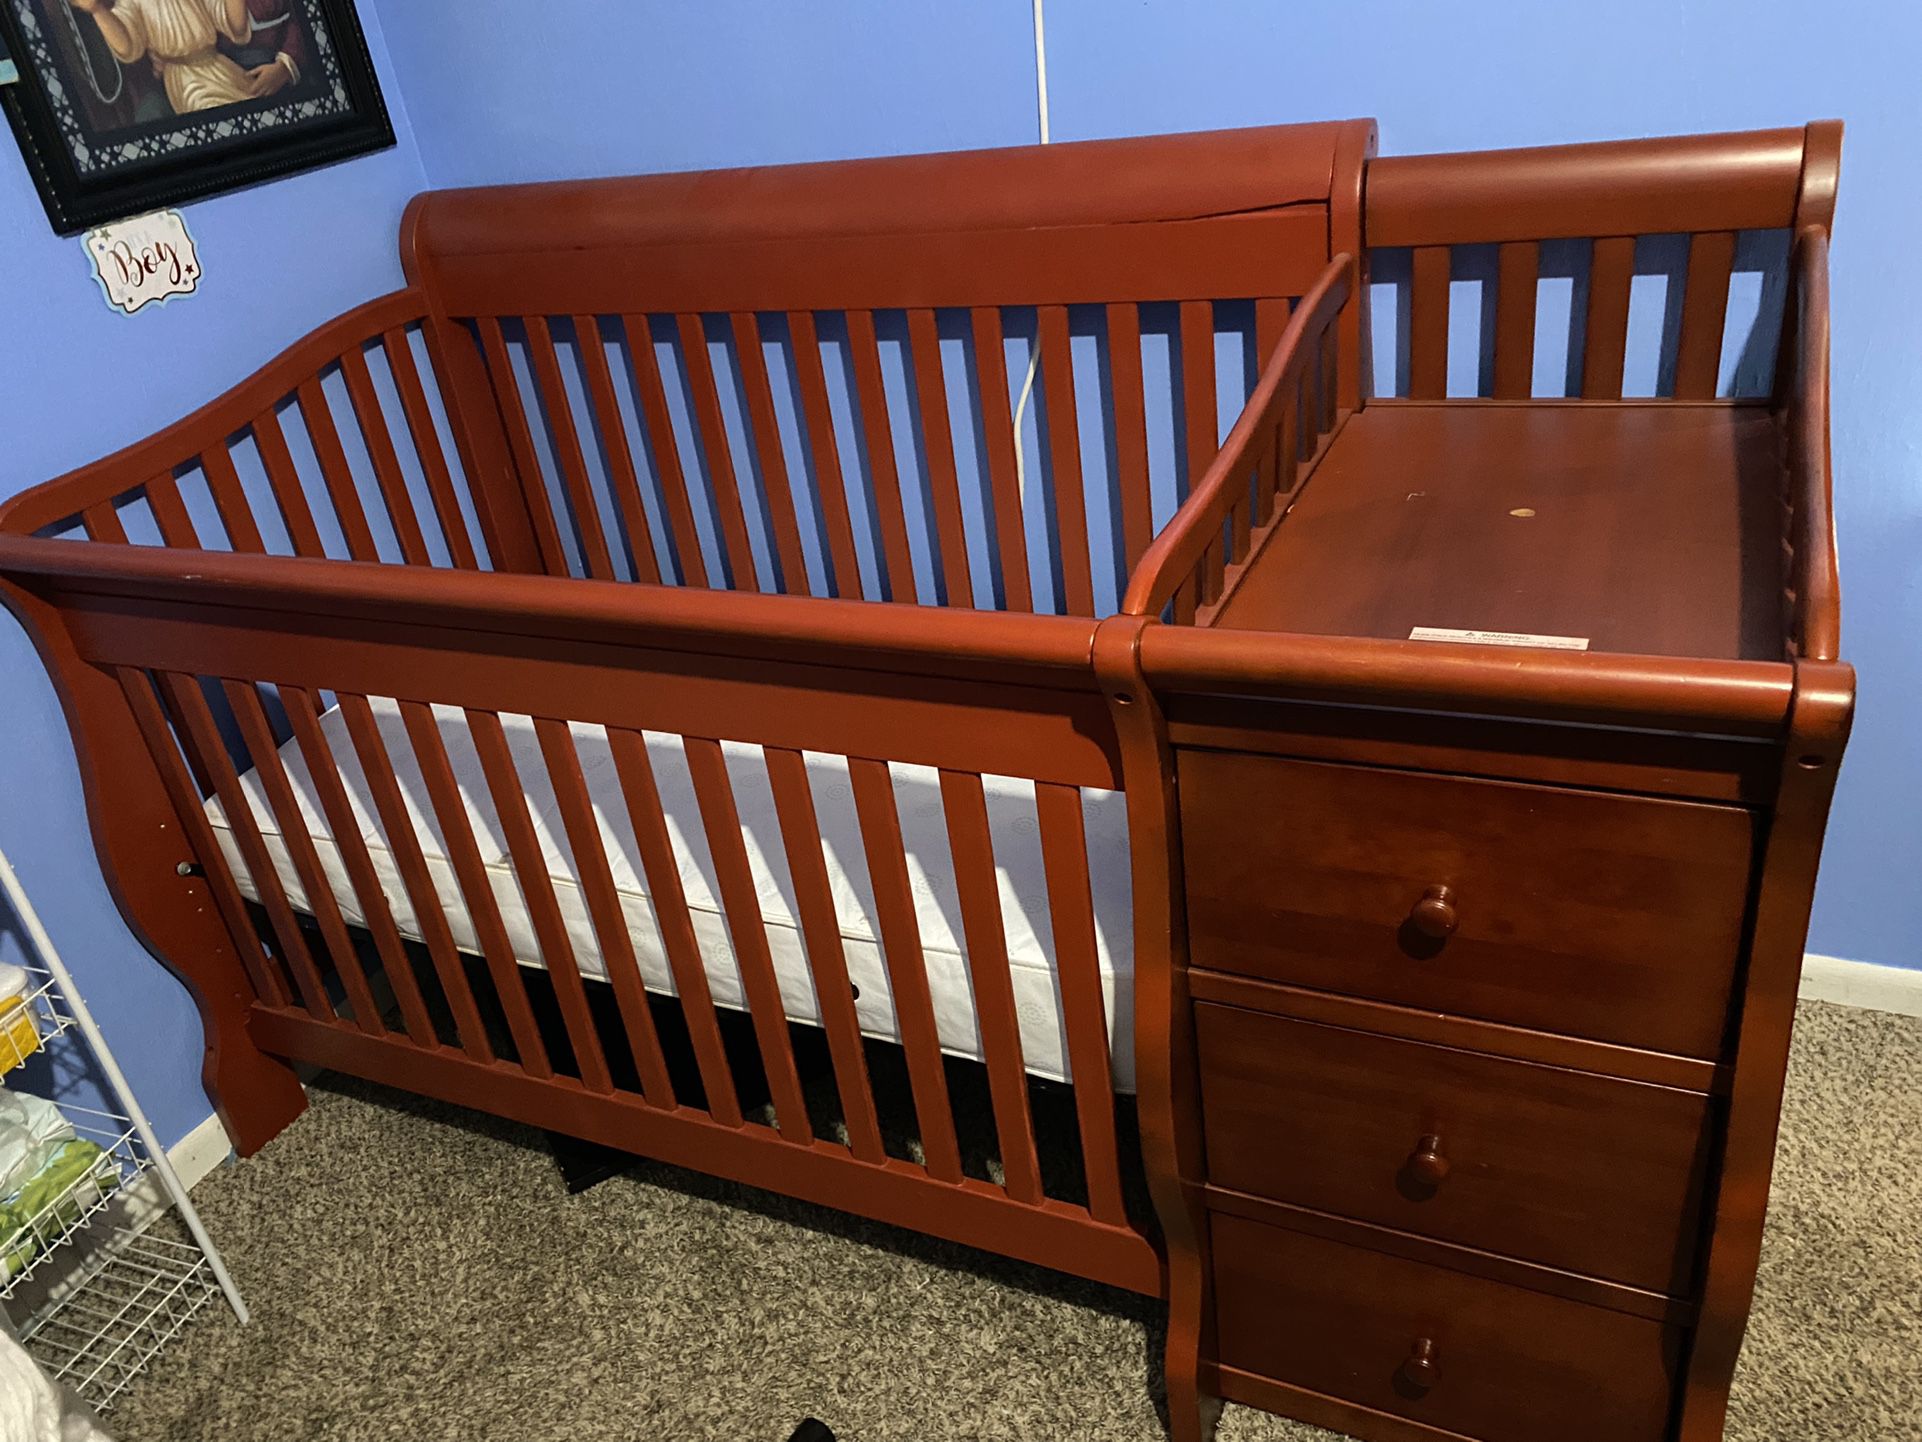 crib for baby that we no longer need